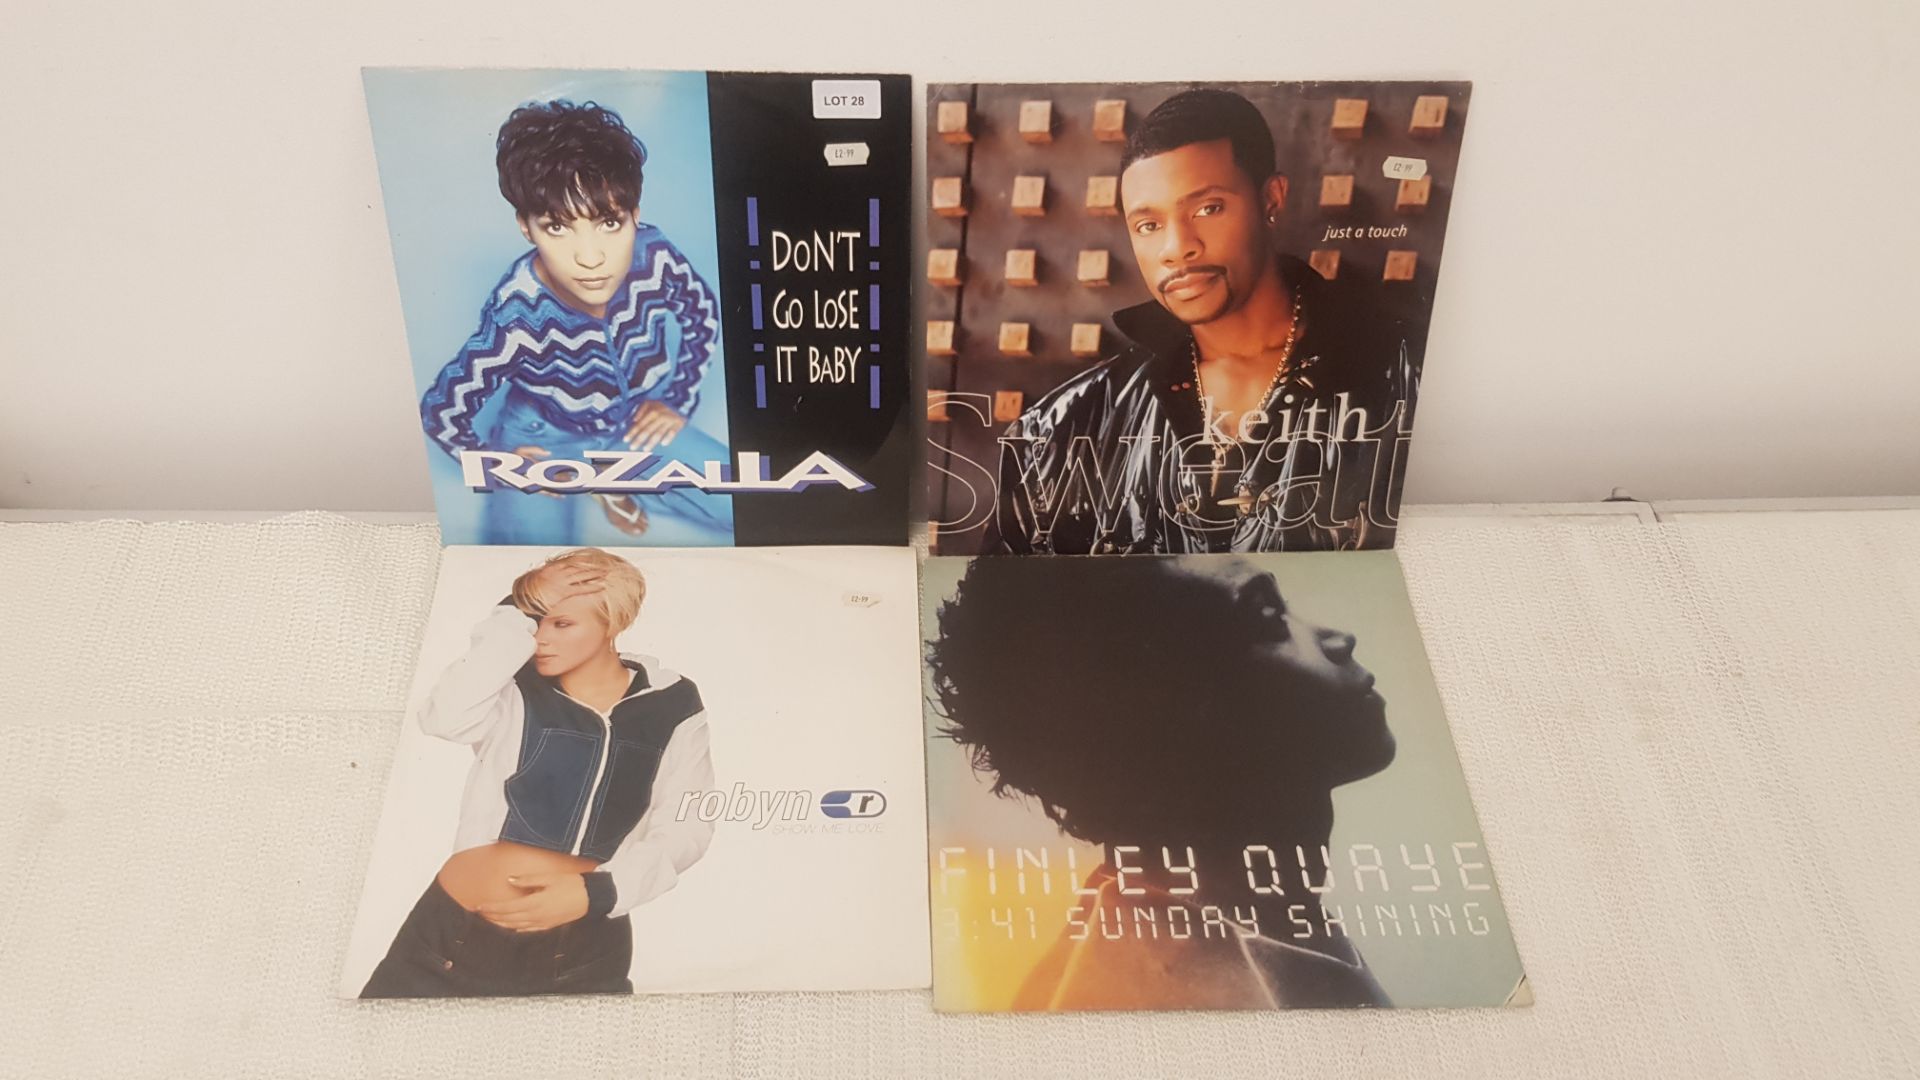 4 X 12" Vinyl. 1 X Rozalla Don't Go Lose It Baby, 1 X Keith Sweat Just A Touch. 1 X Robyn Show